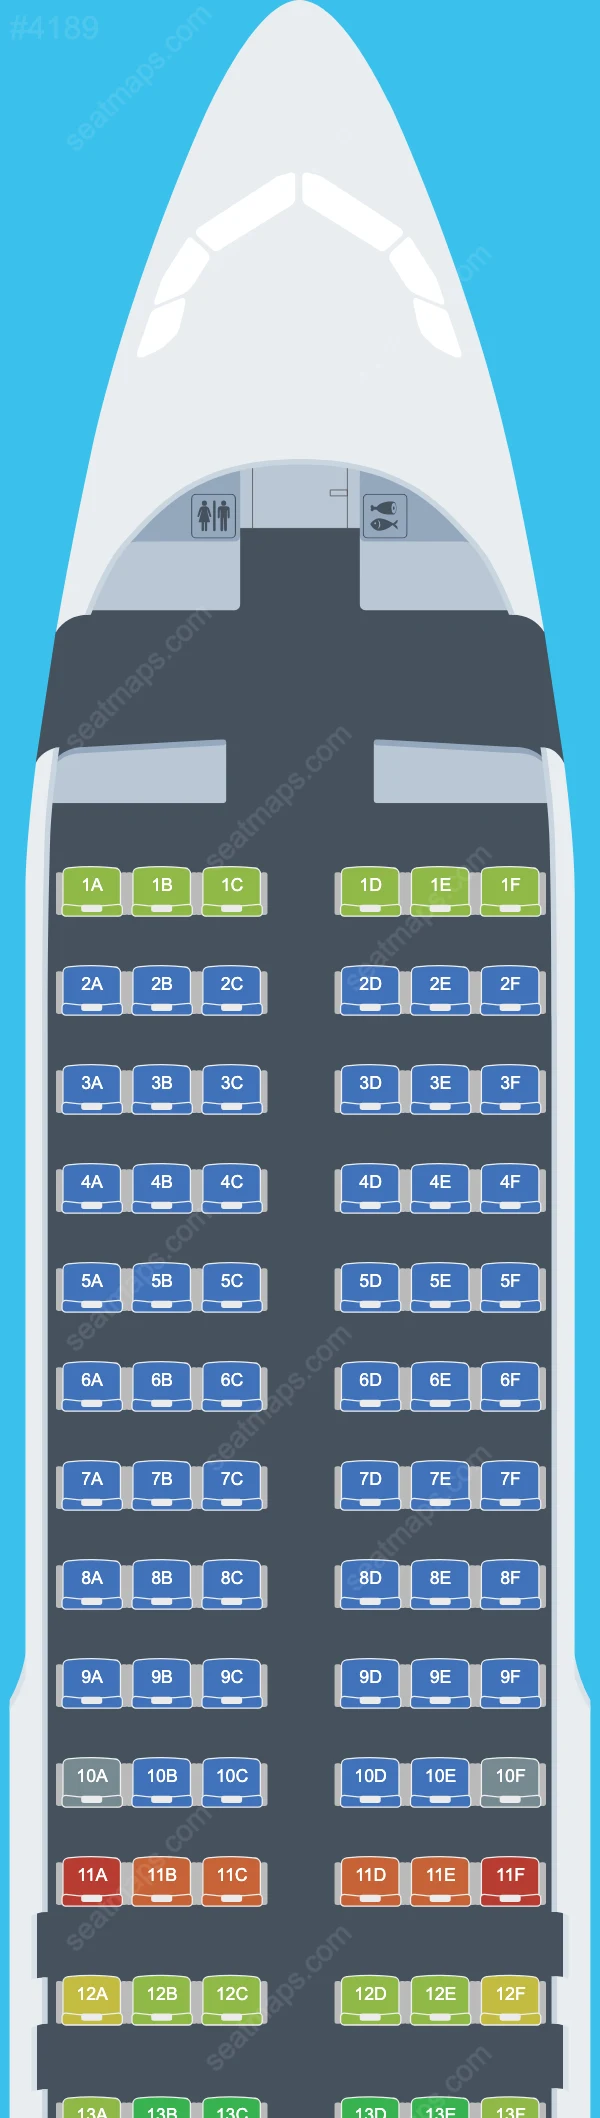 SmartLynx Airbus A320 Seat Maps A320-200 V.1